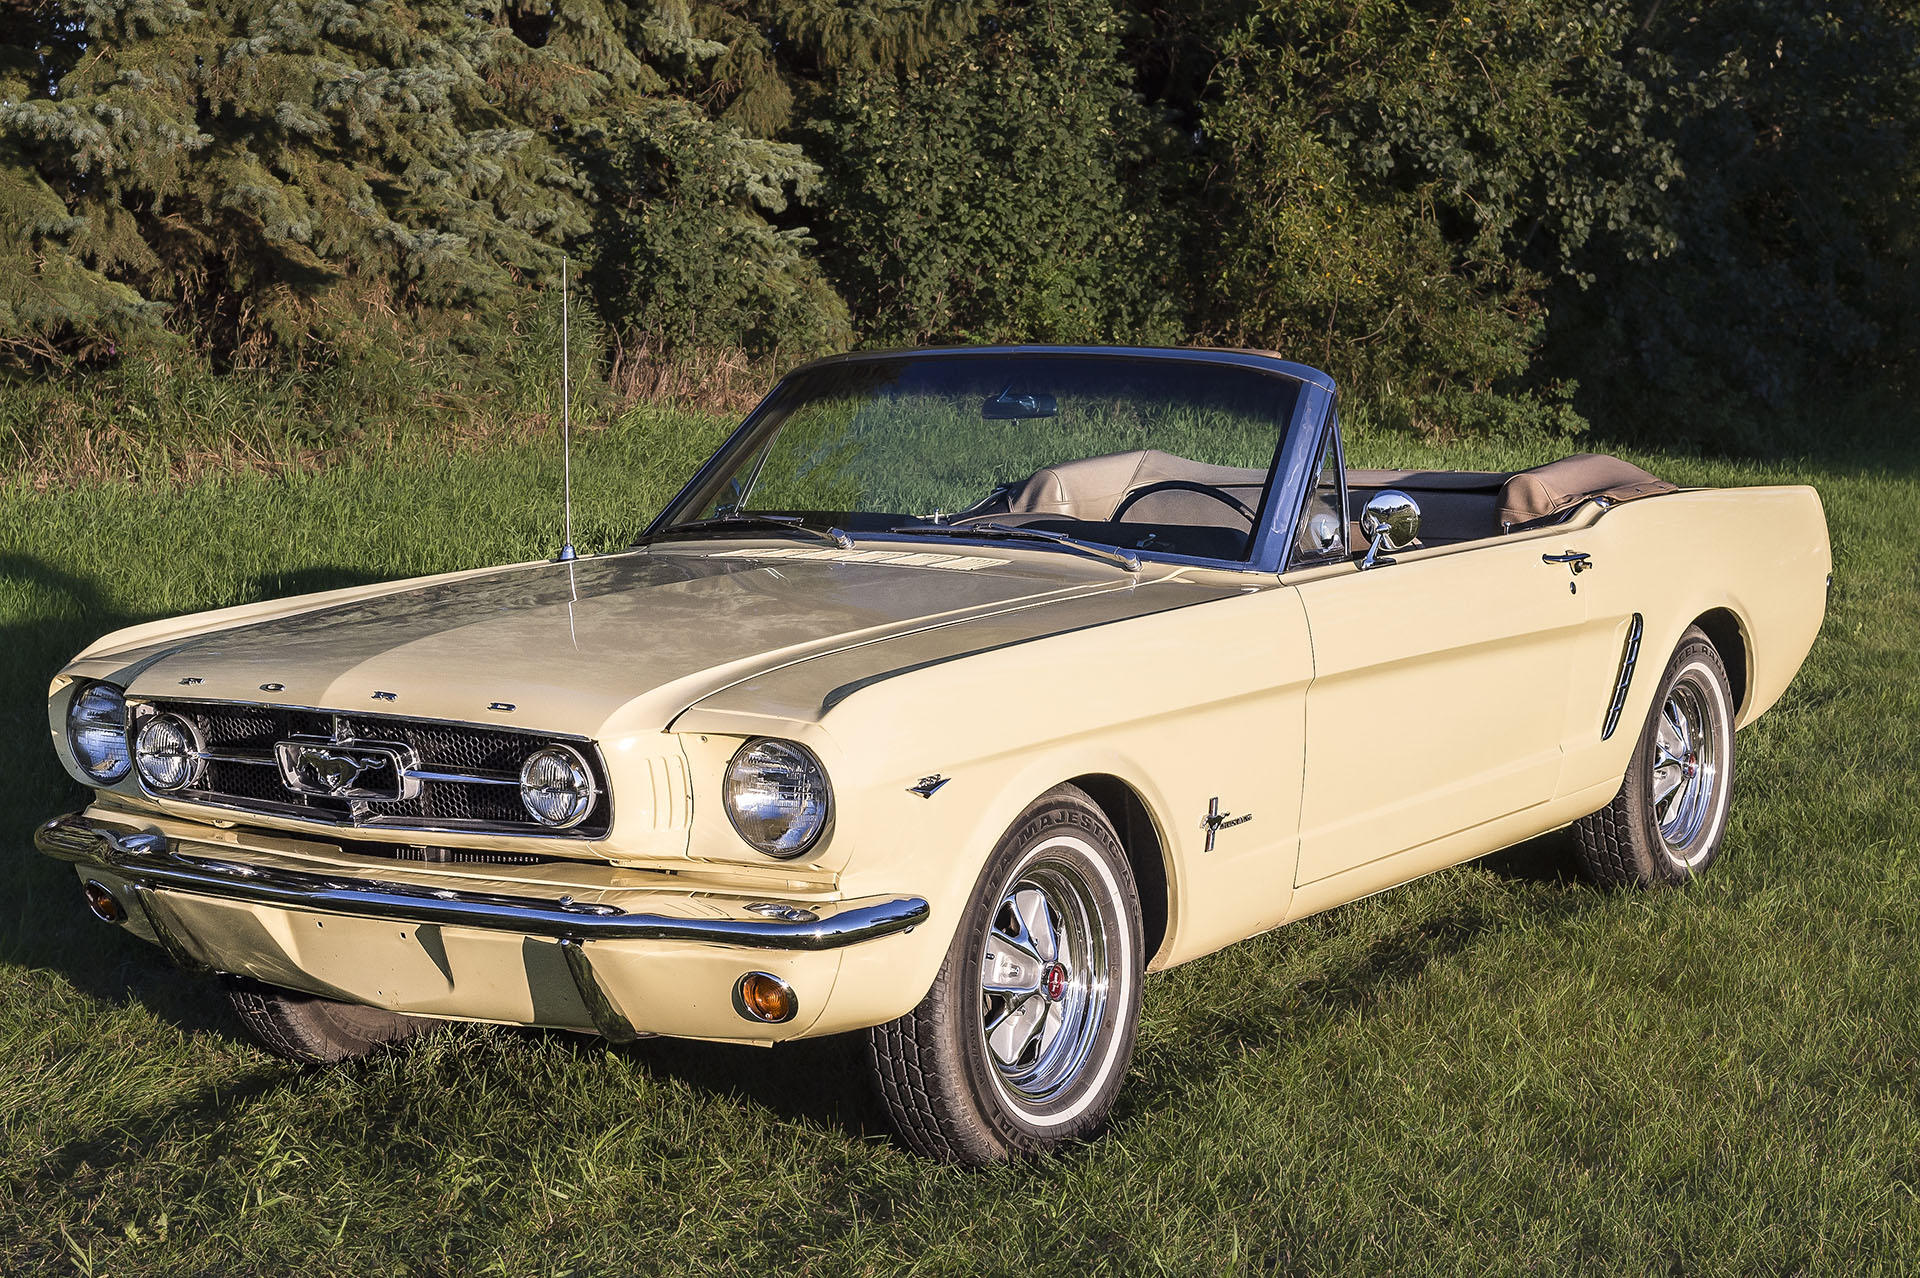   1964 1/2 Mustang Convertible    Built April 23, 1964. This car was completely rebuilt in 2011 on a rotisserie, detailed underneath and then reassembled. Colour is Sunlight Yellow with Palomino interior, 289 engine was balanced and blueprinted, and 